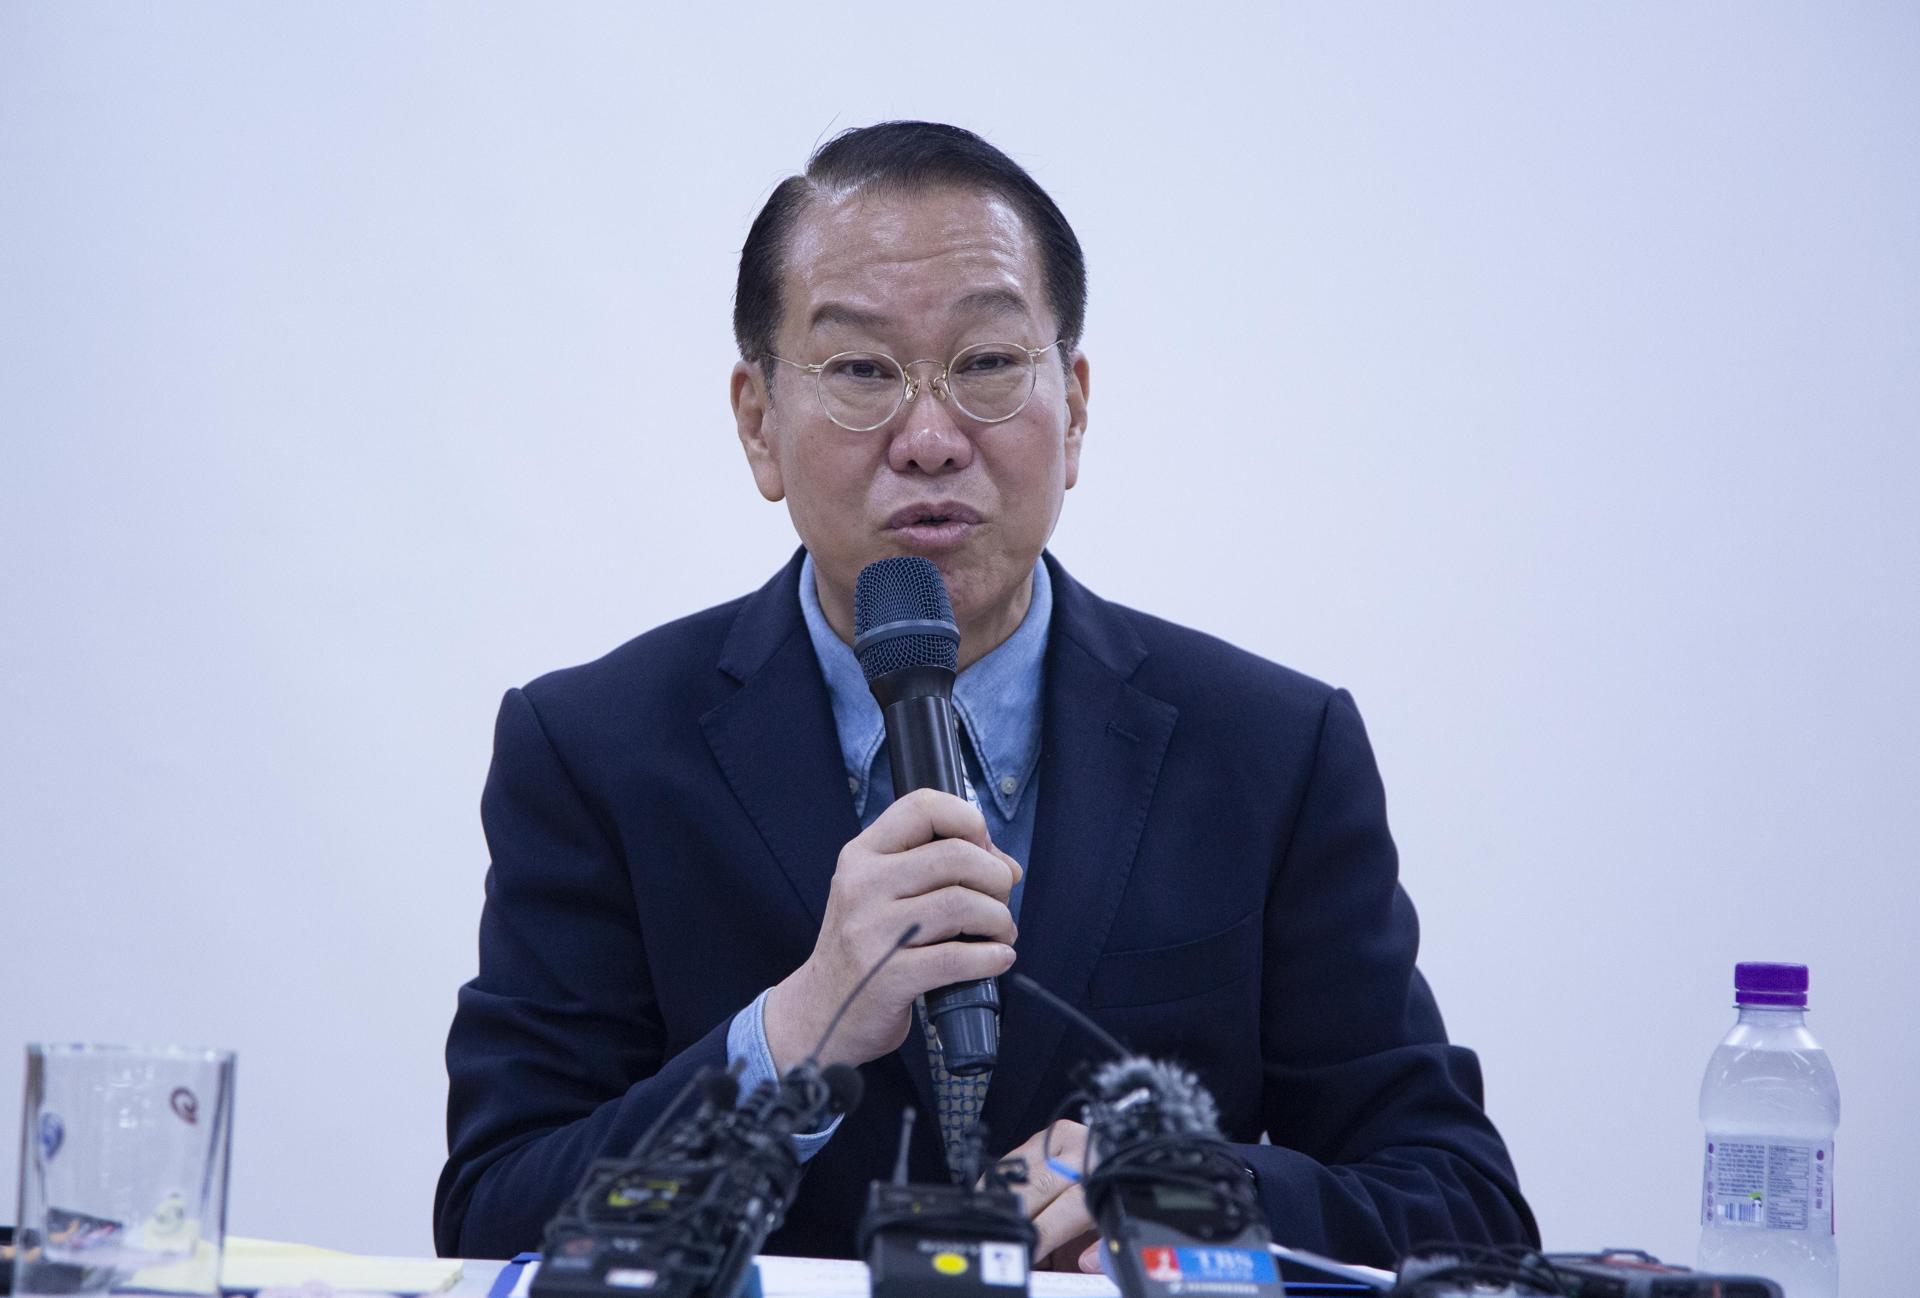 South Korean unification minister Kwon Young-se, speaks during a press conference at the Hanawon (Settlement Support Center for North Korean Refugees) in Ansong, Gyeonggi province, South Korea, 10 July 2023. EFE/EPA/JEON HEON-KYUN / POOL